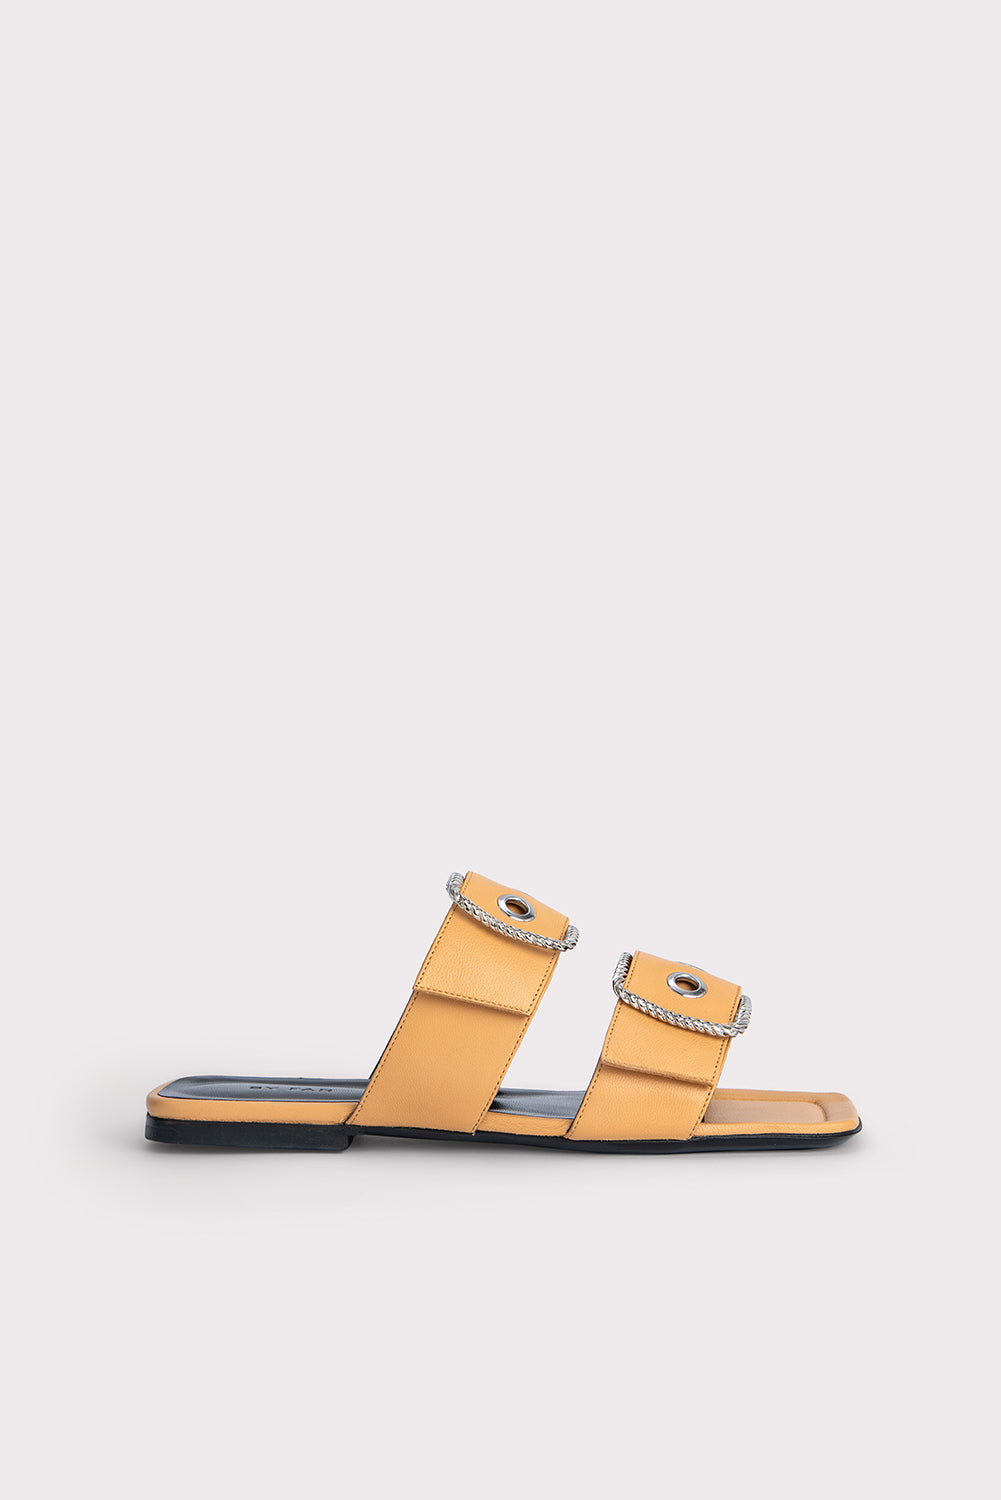 Saba Biscuit Nappa Leather